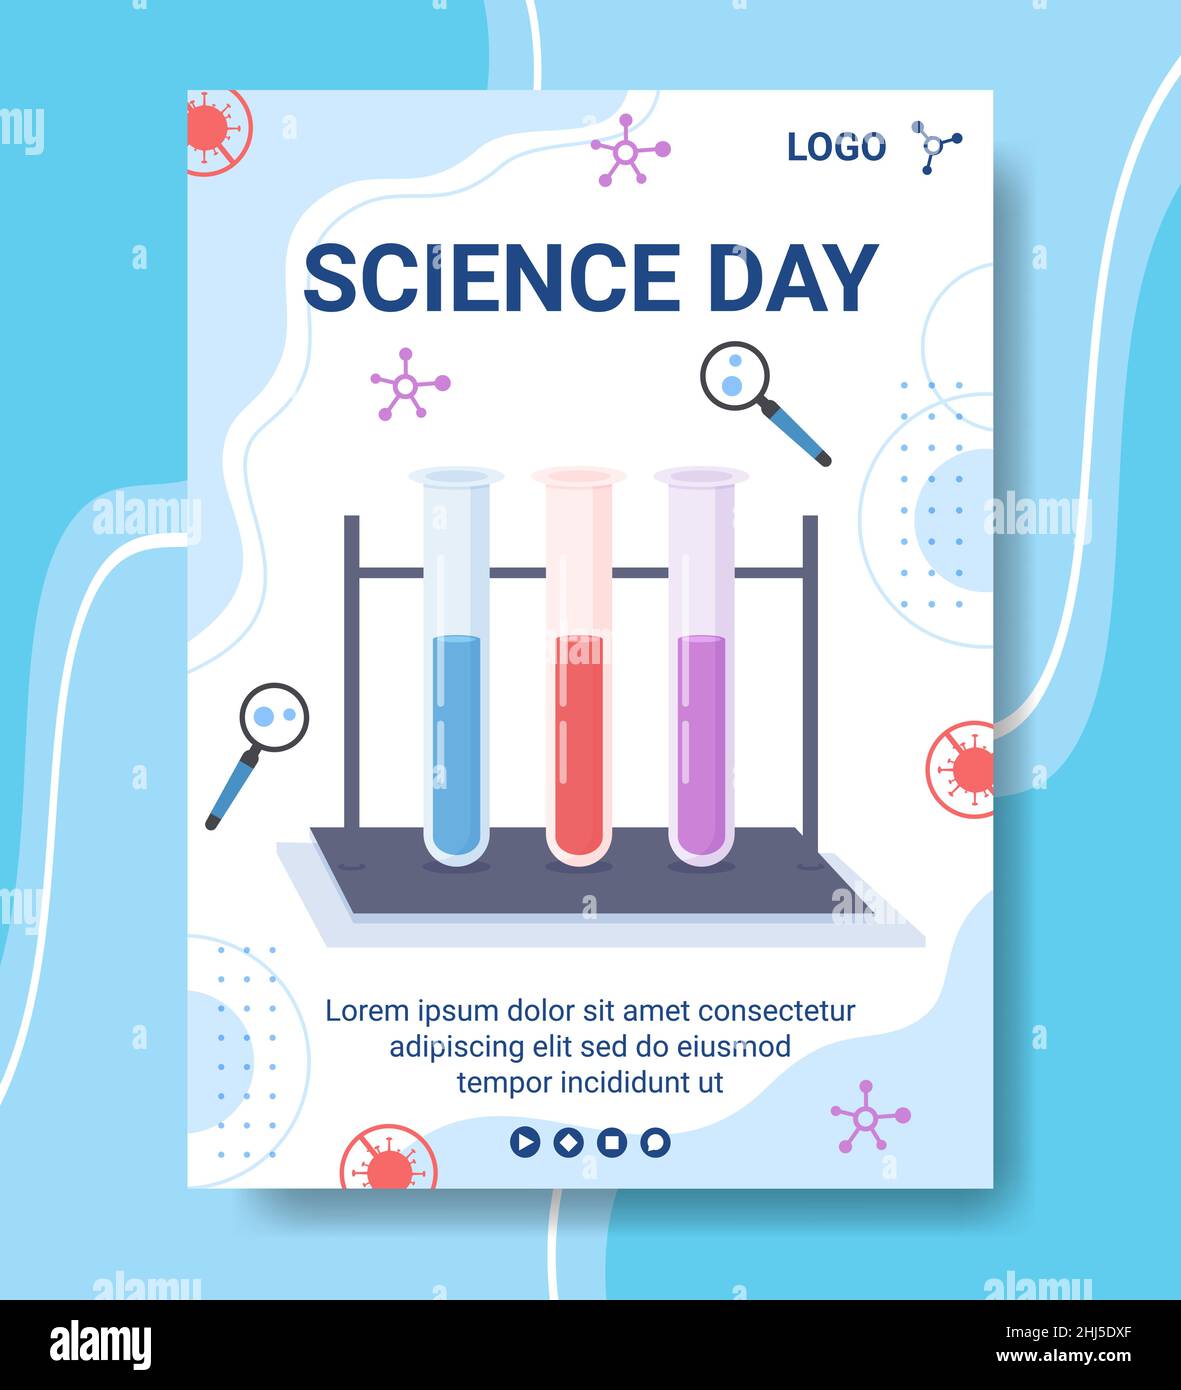 National Science Day Poster Template Flat Design Illustration Editable of Square Background Suitable for Social Media or Greeting Card Stock Vector